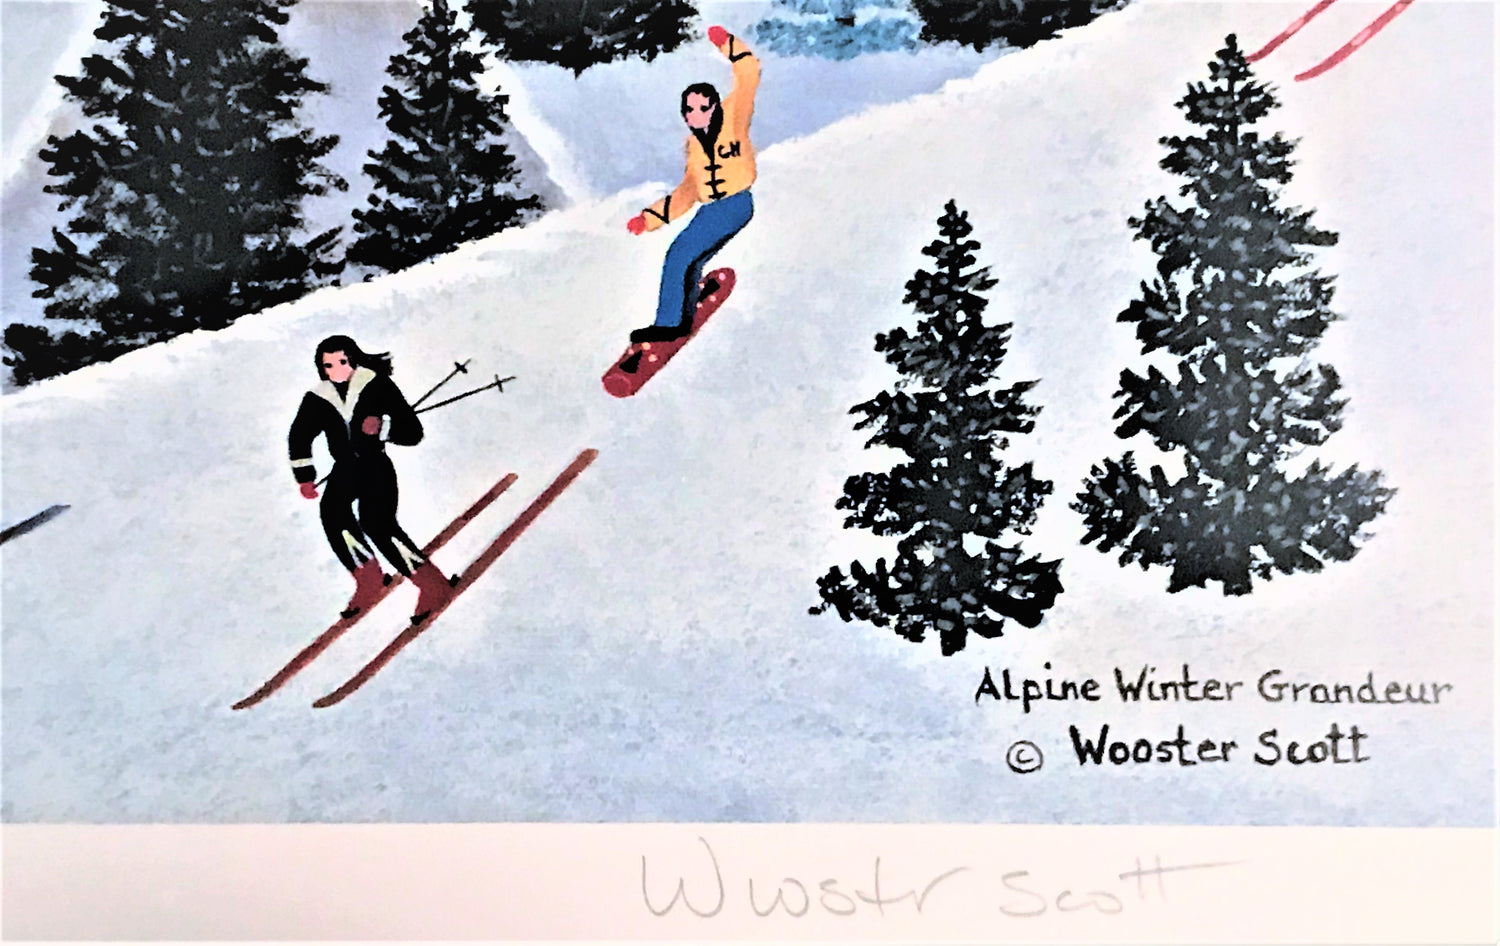 Alpine Winter Grandeur Jane Wooster Scott Lithograph Print Artist Hand Signed and Numbered